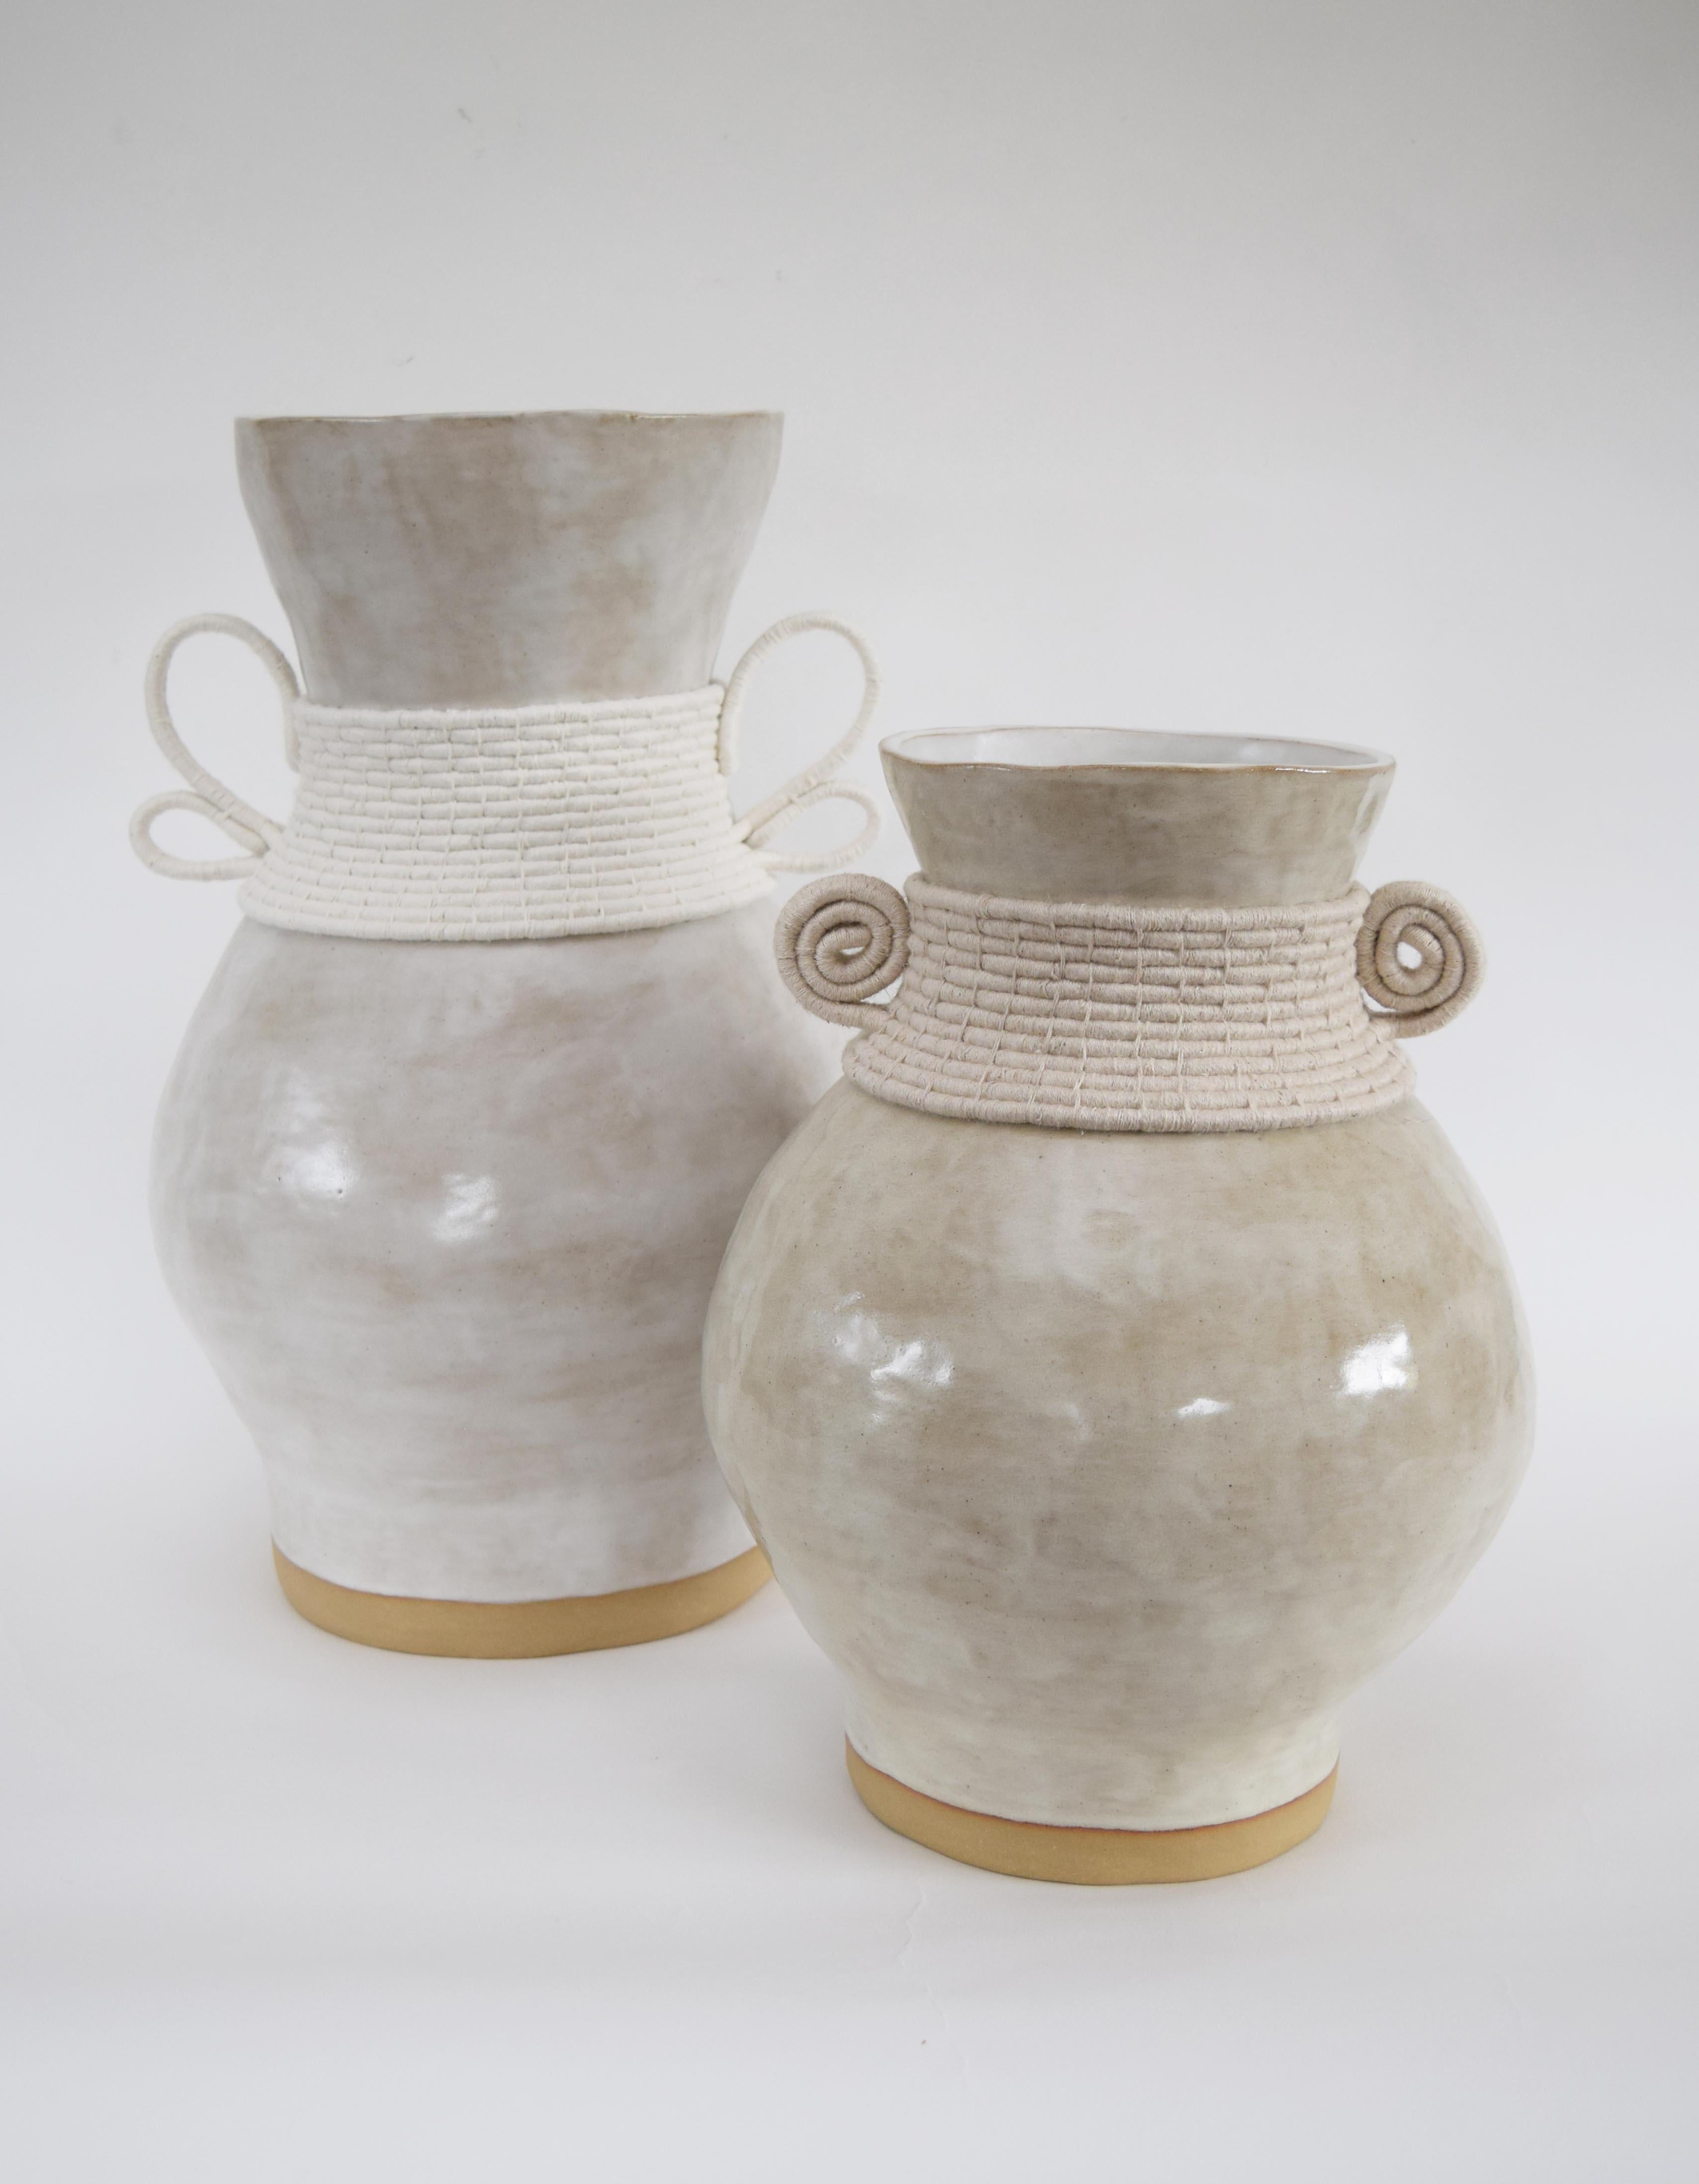 Hand-Crafted One of a Kind Handmade Ceramic Vase #796 - Off White Glaze & Woven Cotton Detail